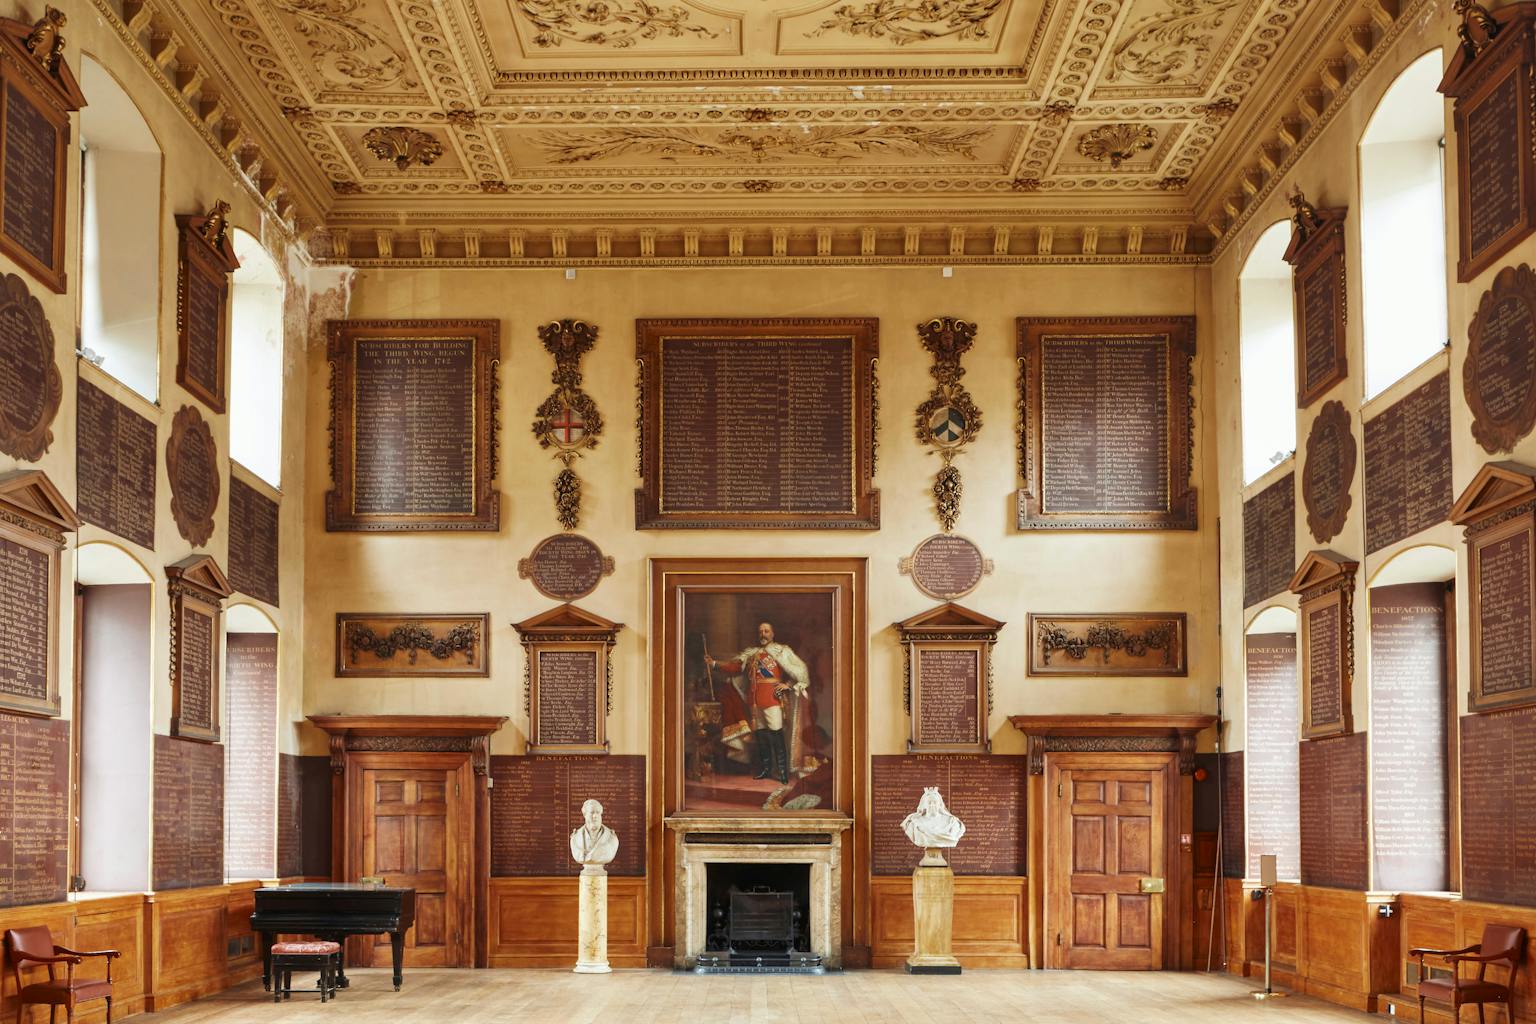 Interior of the Great Hall at Barts, © Matthew Andrews